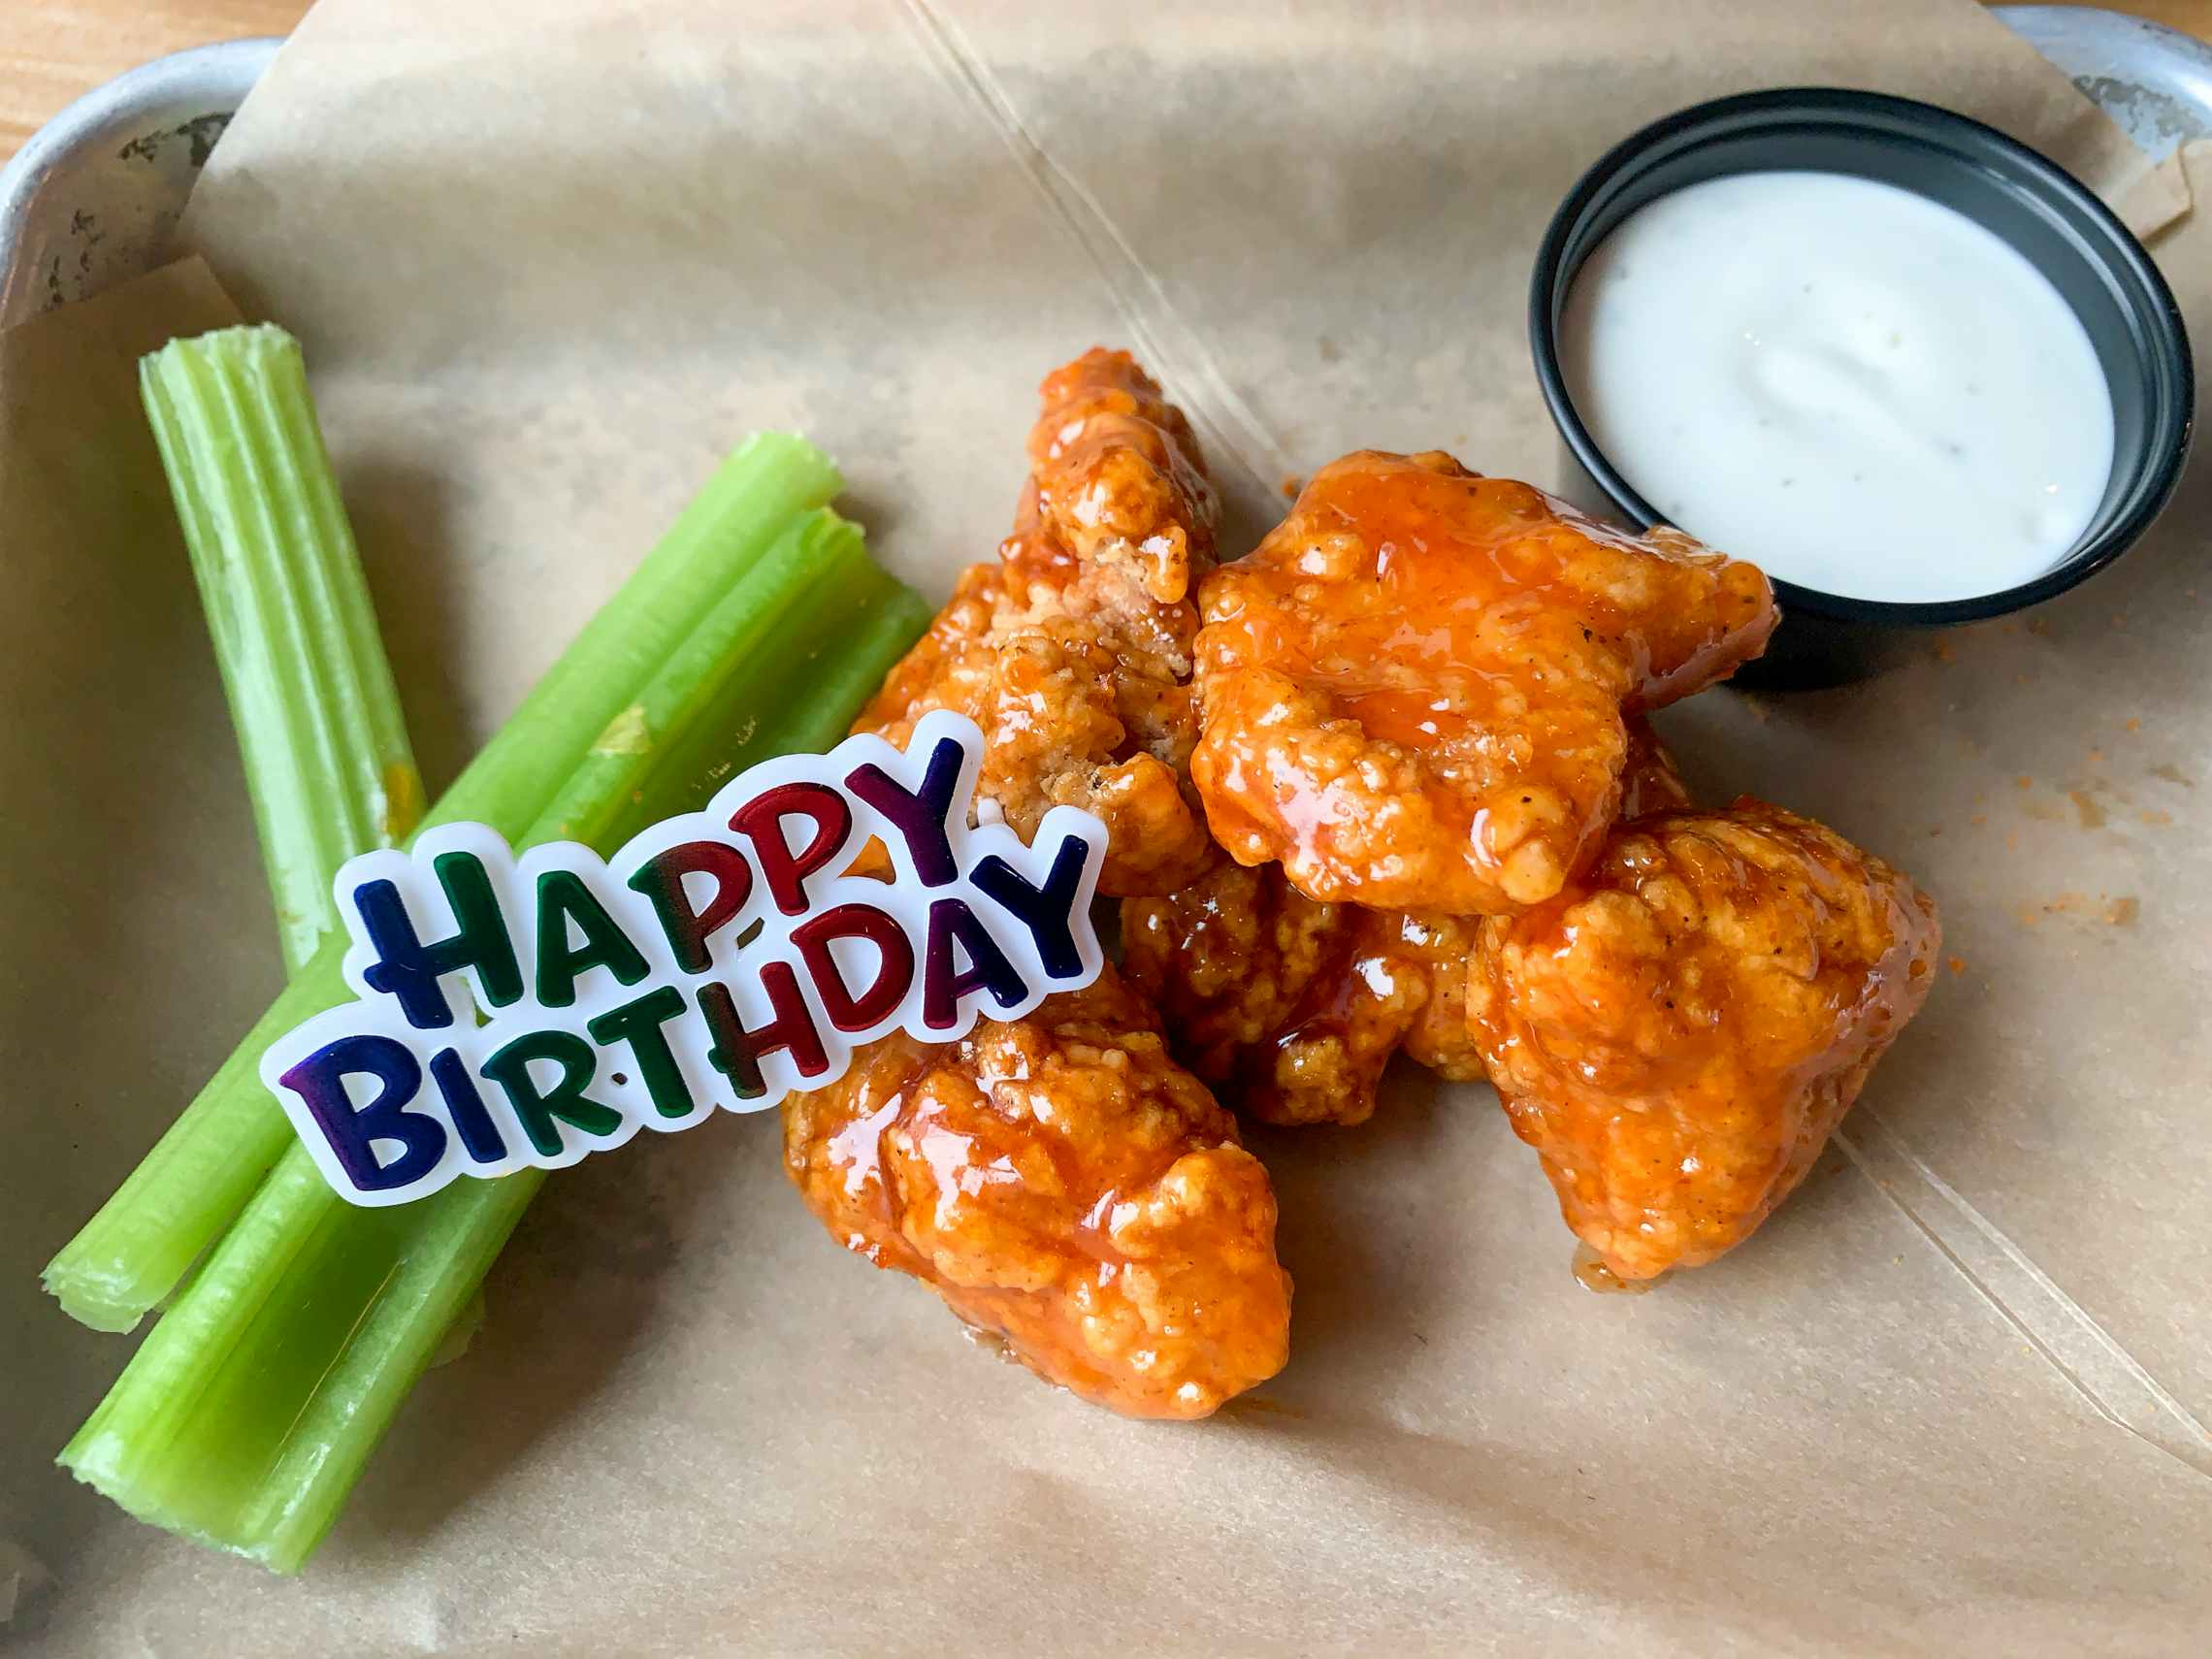 A free Birthday snack size plater of boneless buffalo wings with a plastic Happy Birthday tag on top of it.